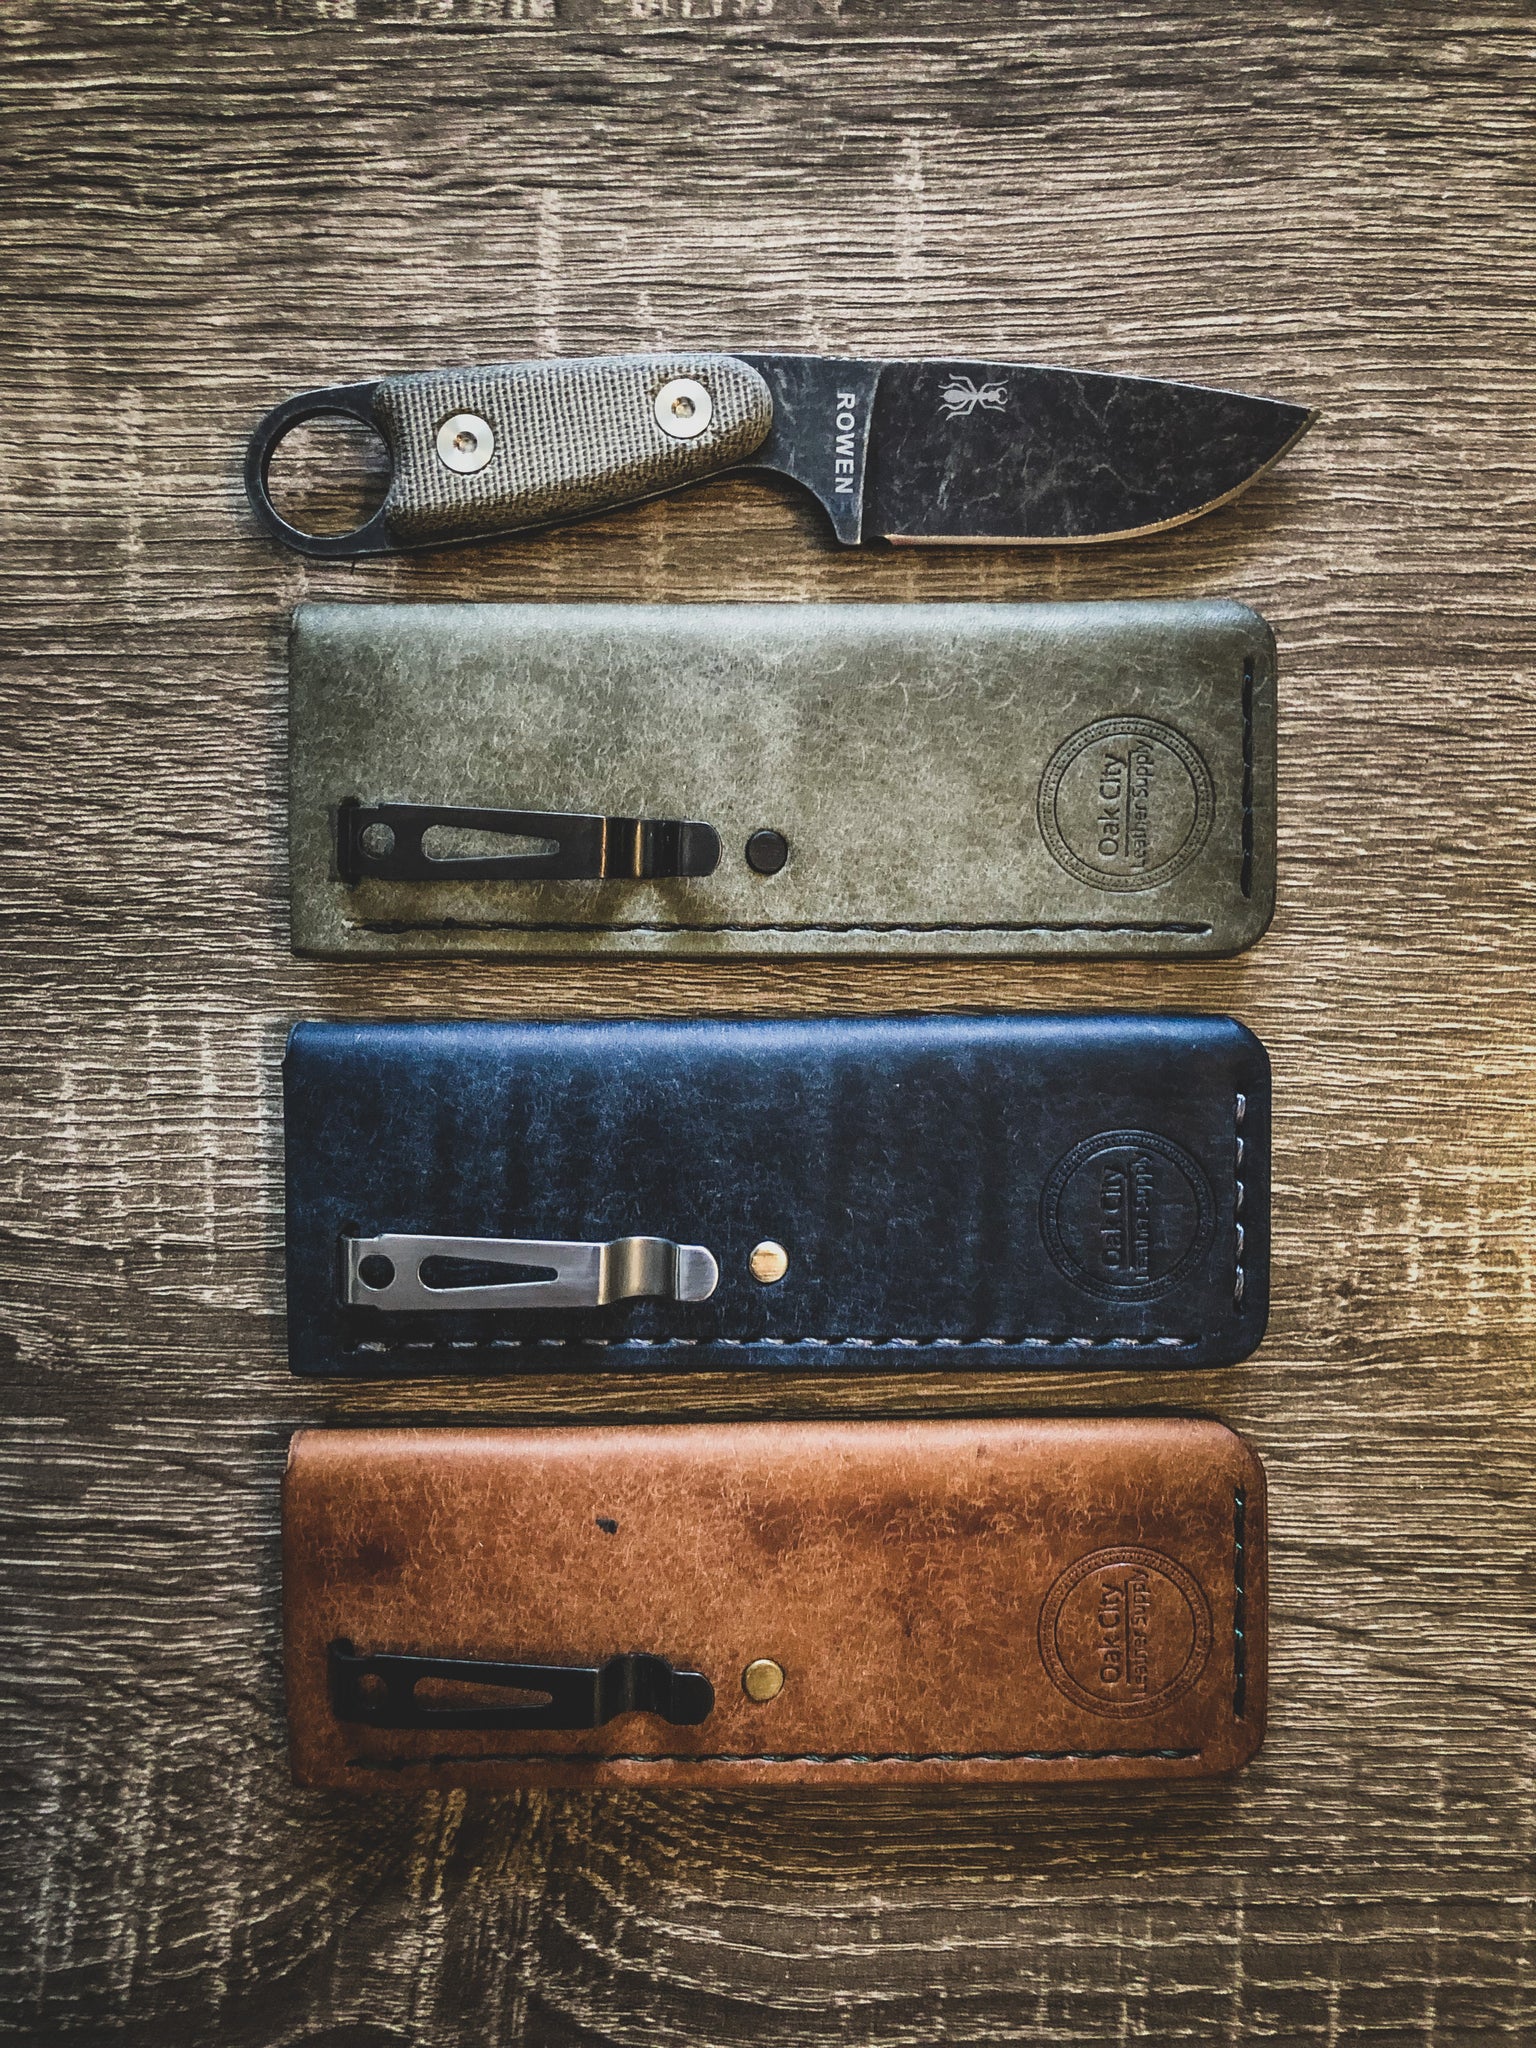 Best field knife sheaths and accessories – The Prepared